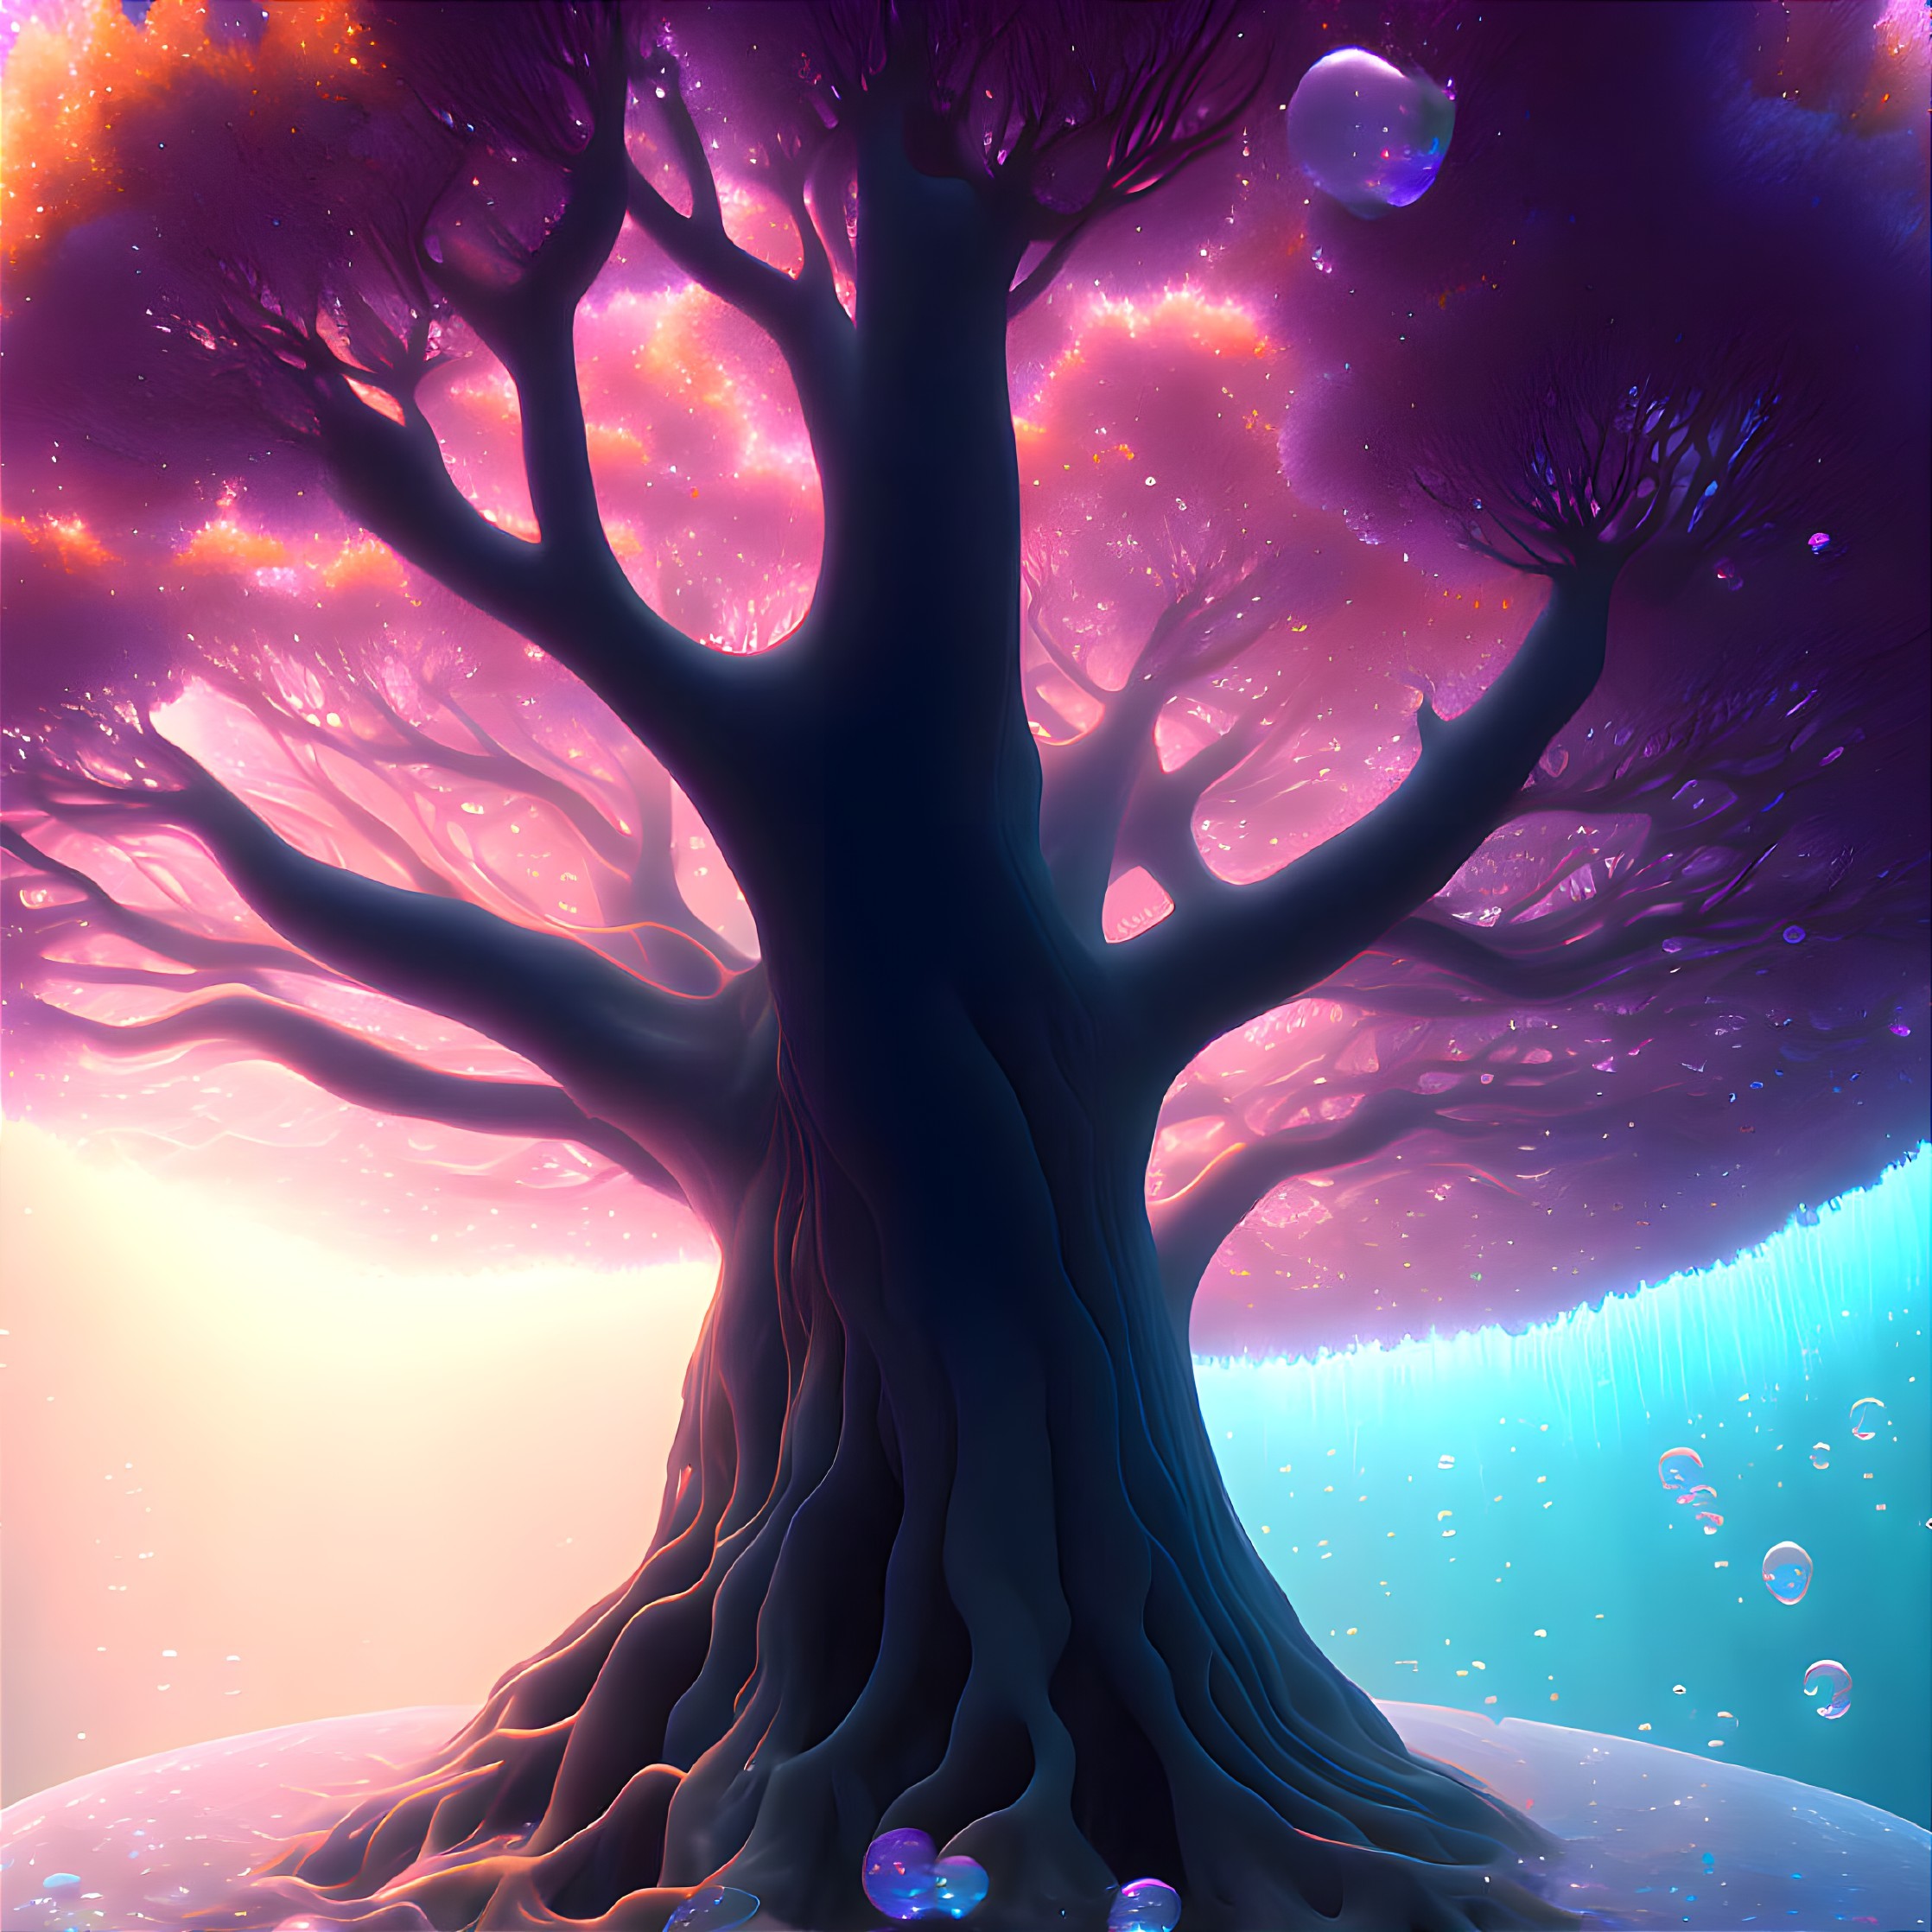 Ascension of souls at the Tree of Life